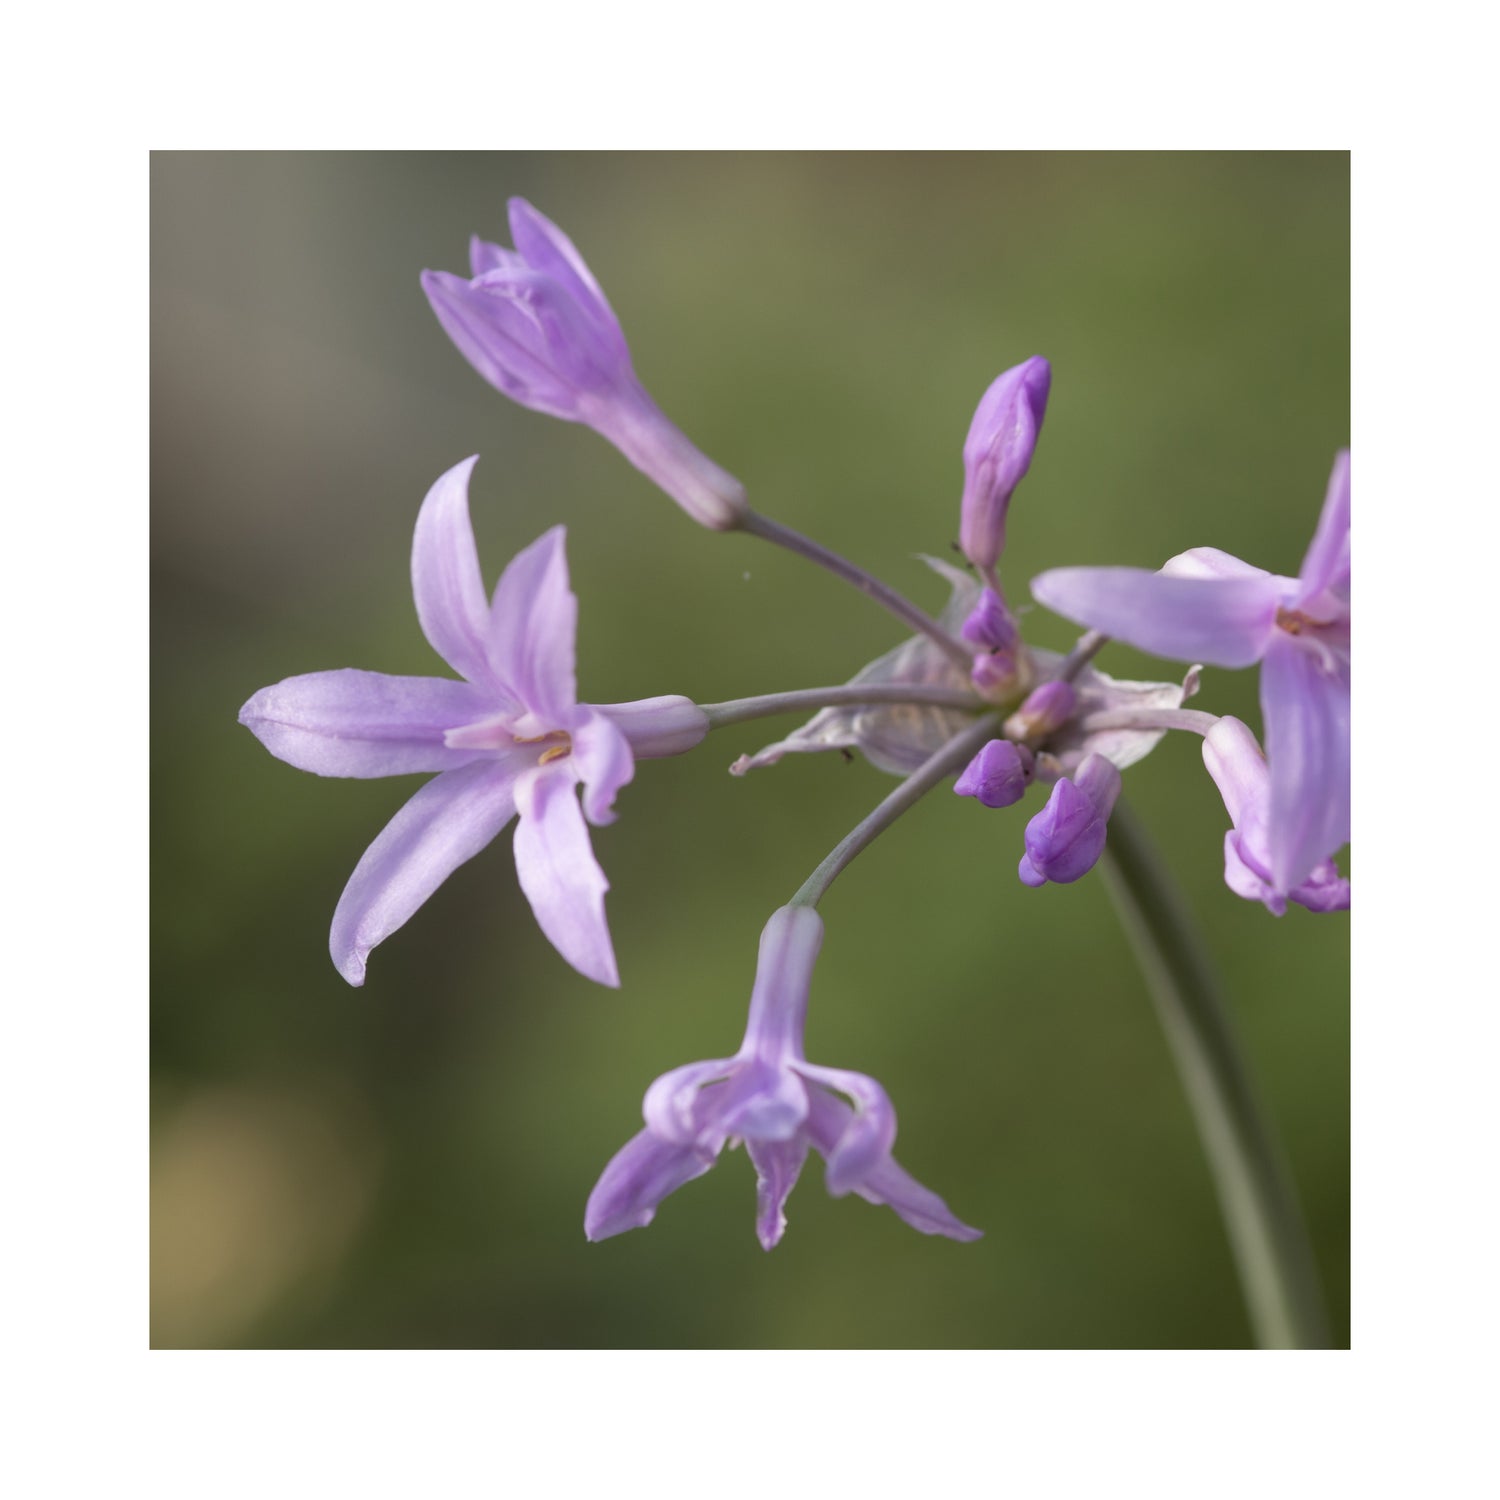 Society Garlic Silver Lace (Tulbaghia violacea &quot;silver lace&quot;)